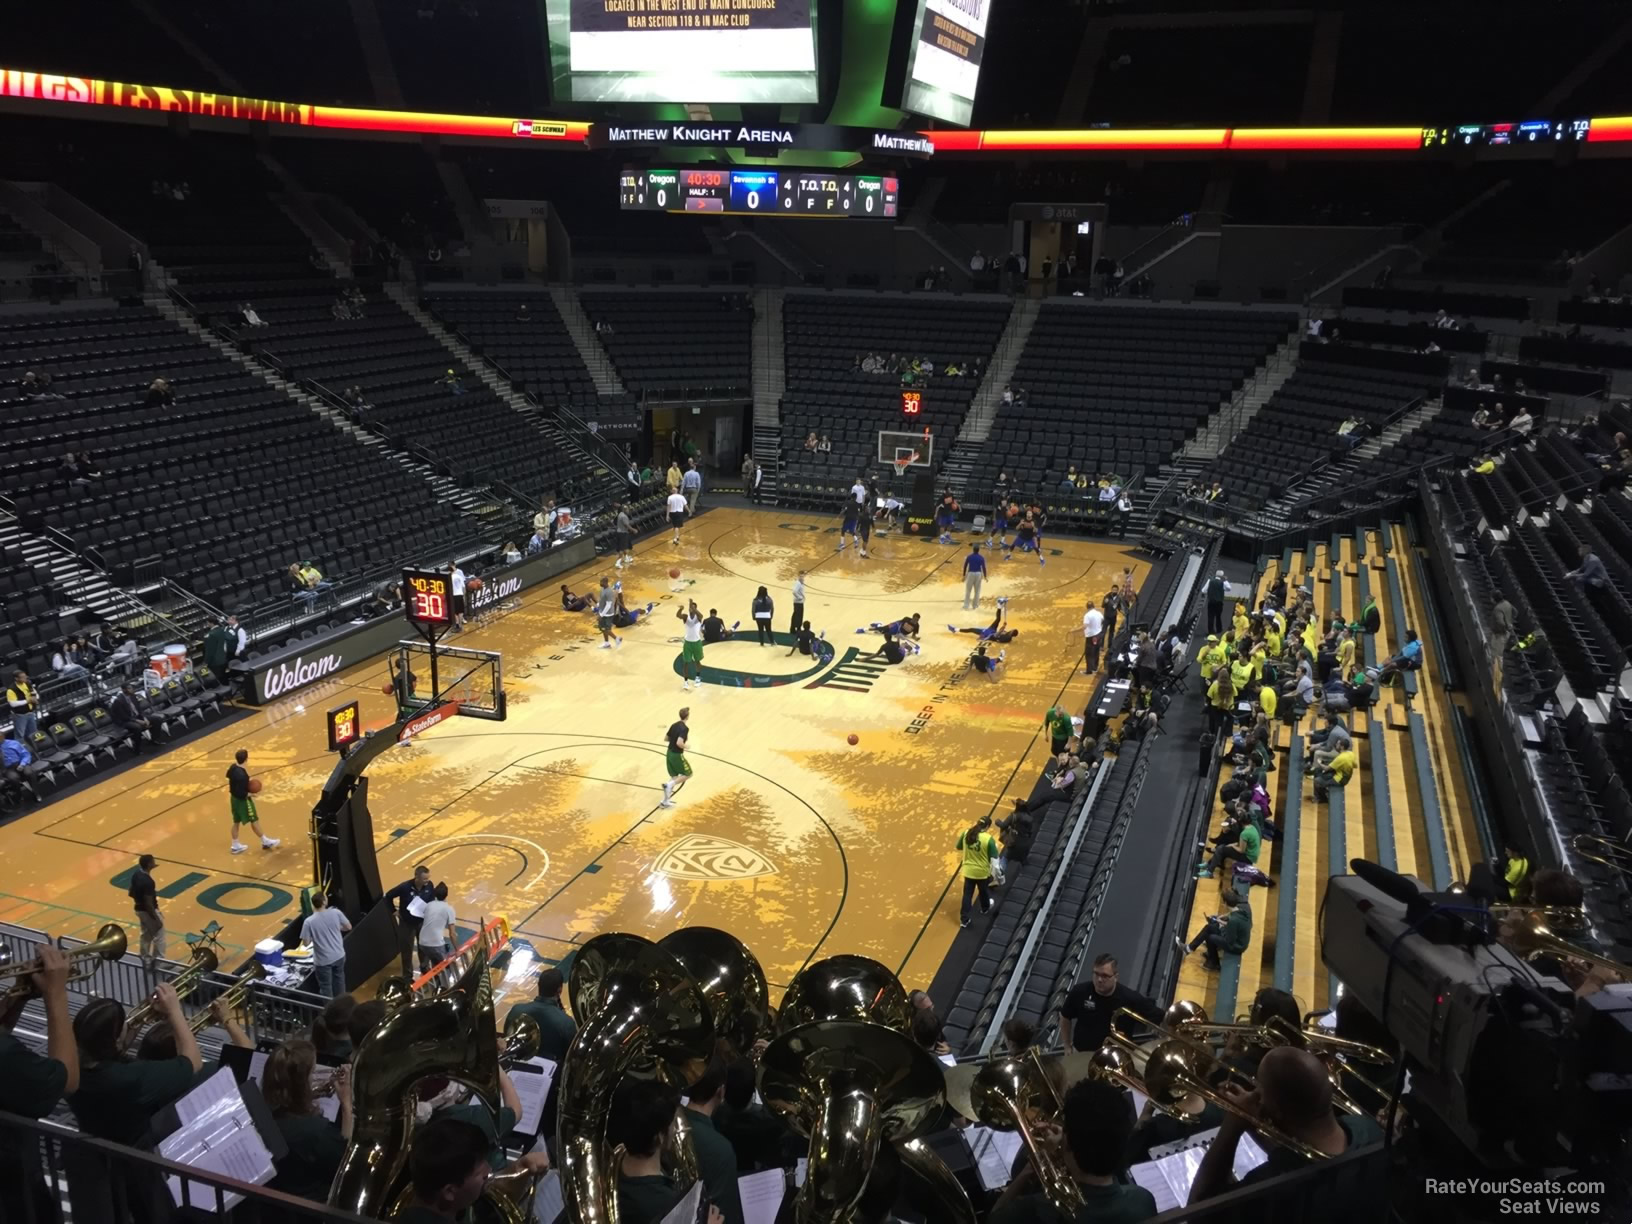 section 116, row k seat view  - matthew knight arena